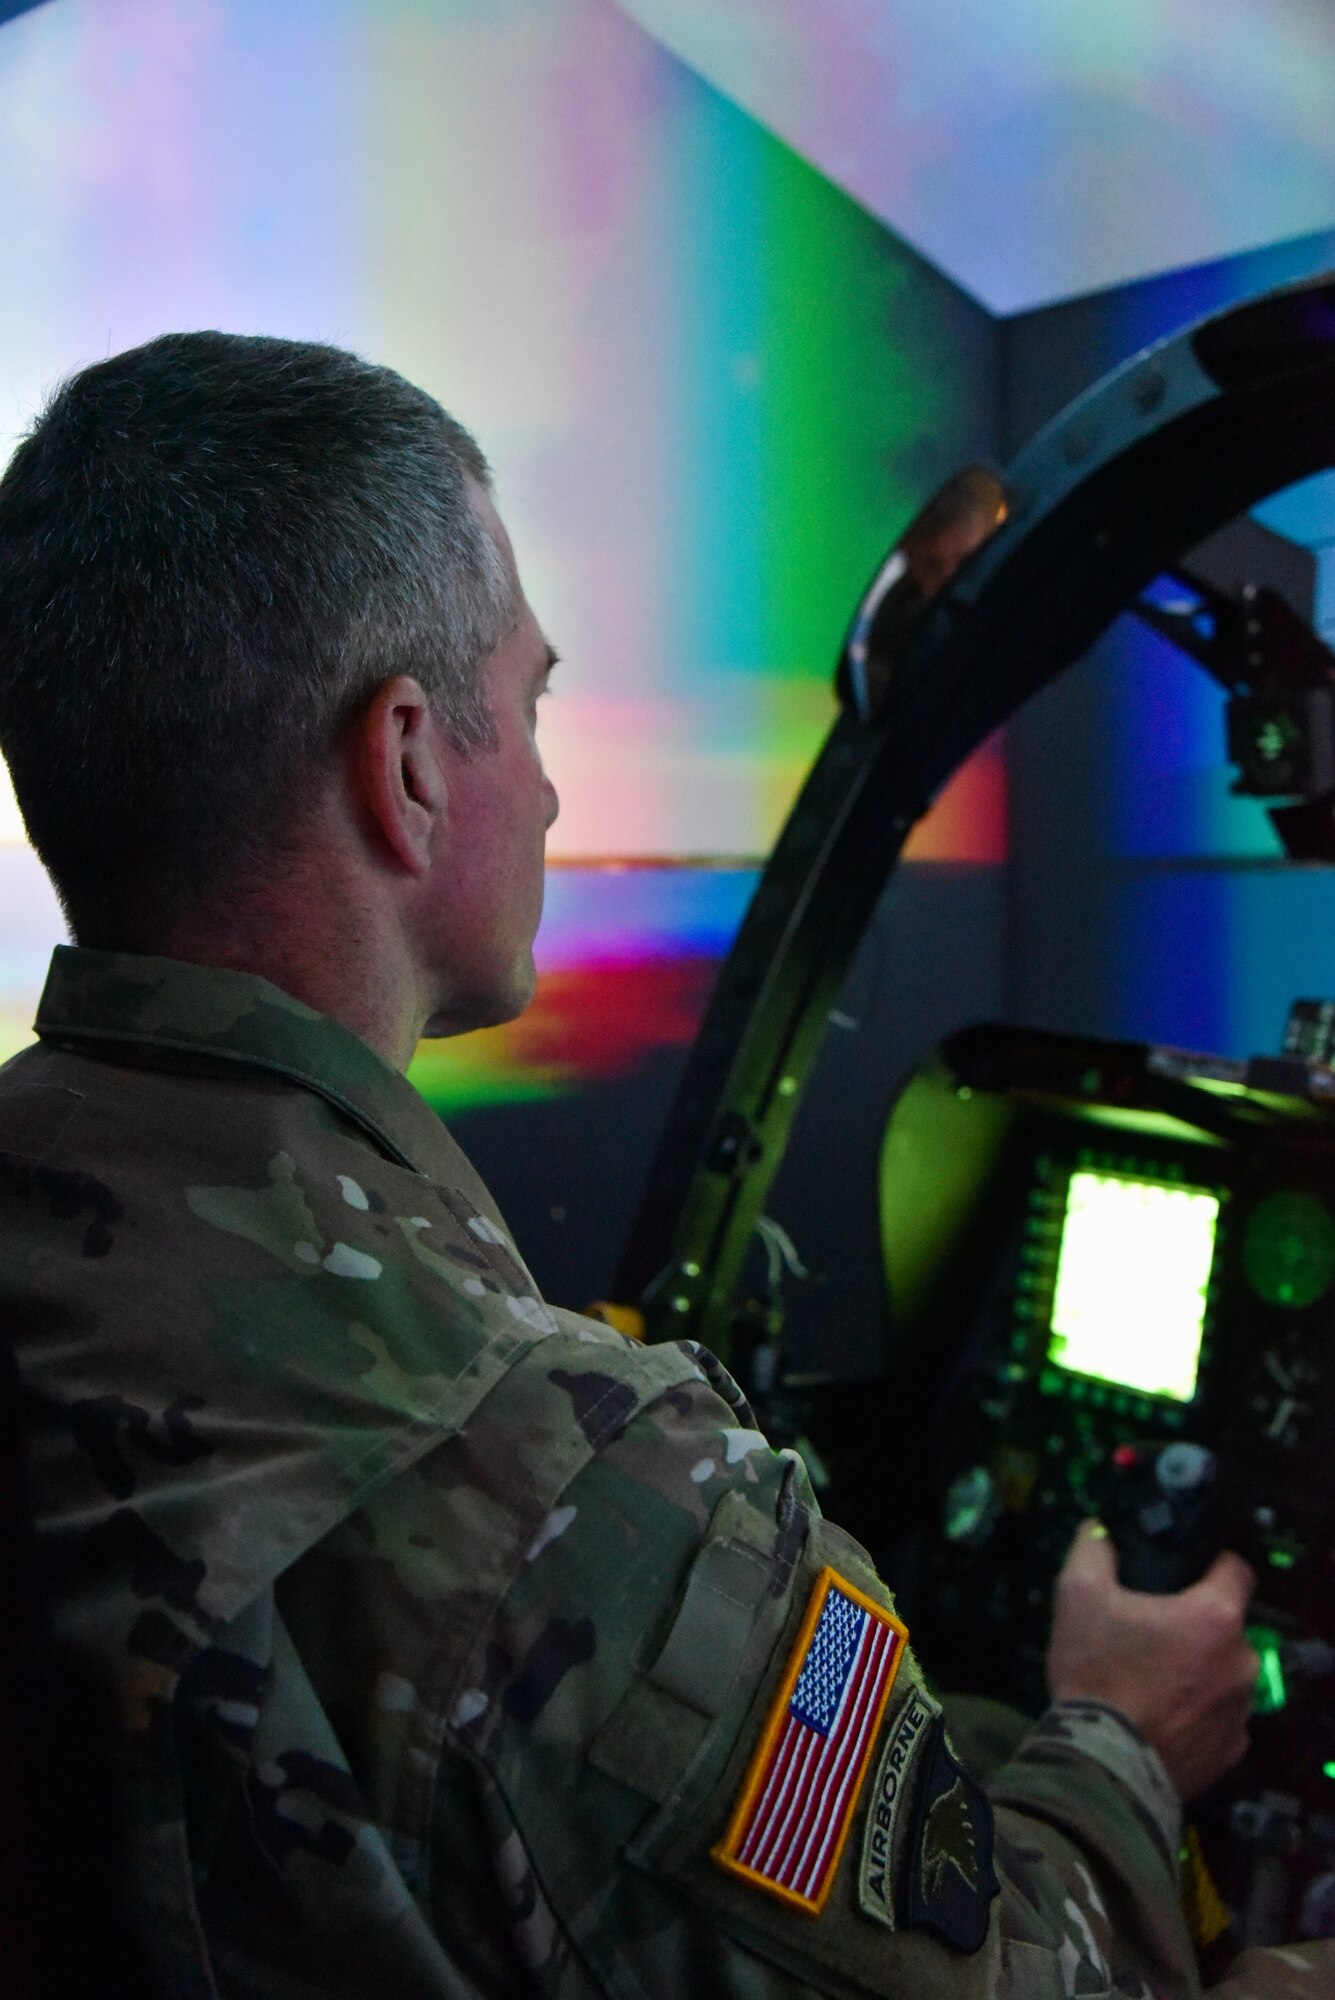 U.S. Army Maj. Gen. Timothy E. Gowen, adjutant general for Maryland, operates an A-10C Thunderbolt II simulator Oct. 6, 2019 during his initial visit to the Maryland Air National Guard’s 175th Wing in Middle River, Md.